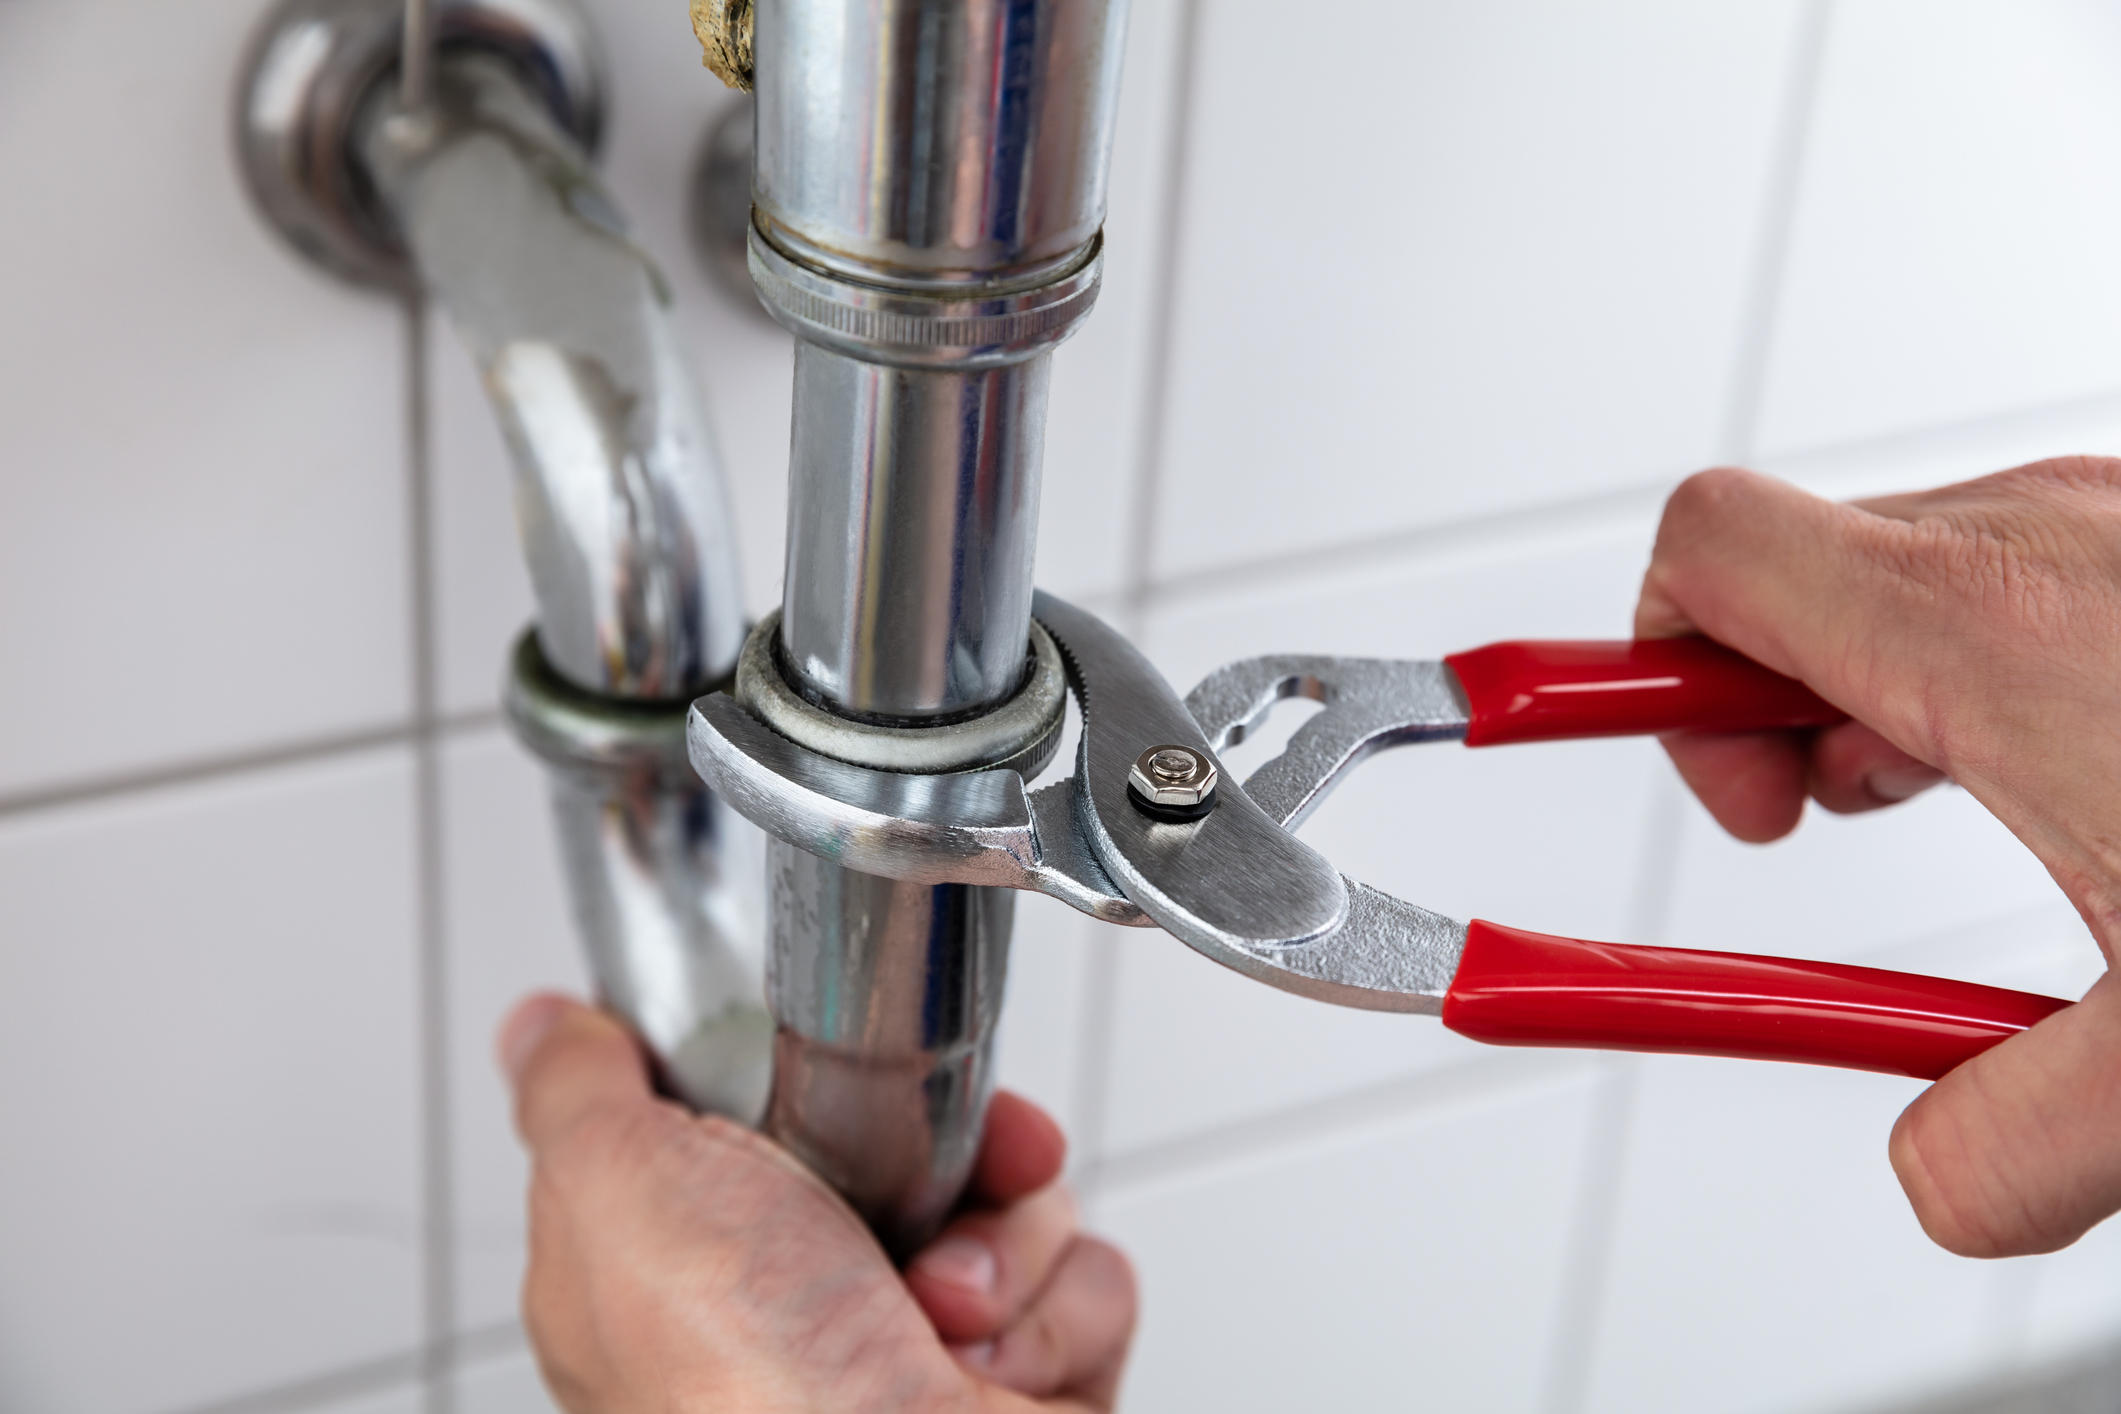 We specialize in all Sewer and Drain stoppages Sewer Inspections Plumbing Repair and Service Leaky pipes repaired Bathroom/Kitchen Fixture Repair and Installation Water Heater Service Heating Repairs Commercial and Residential Plumbing Management Corporations & Apartment Complexes